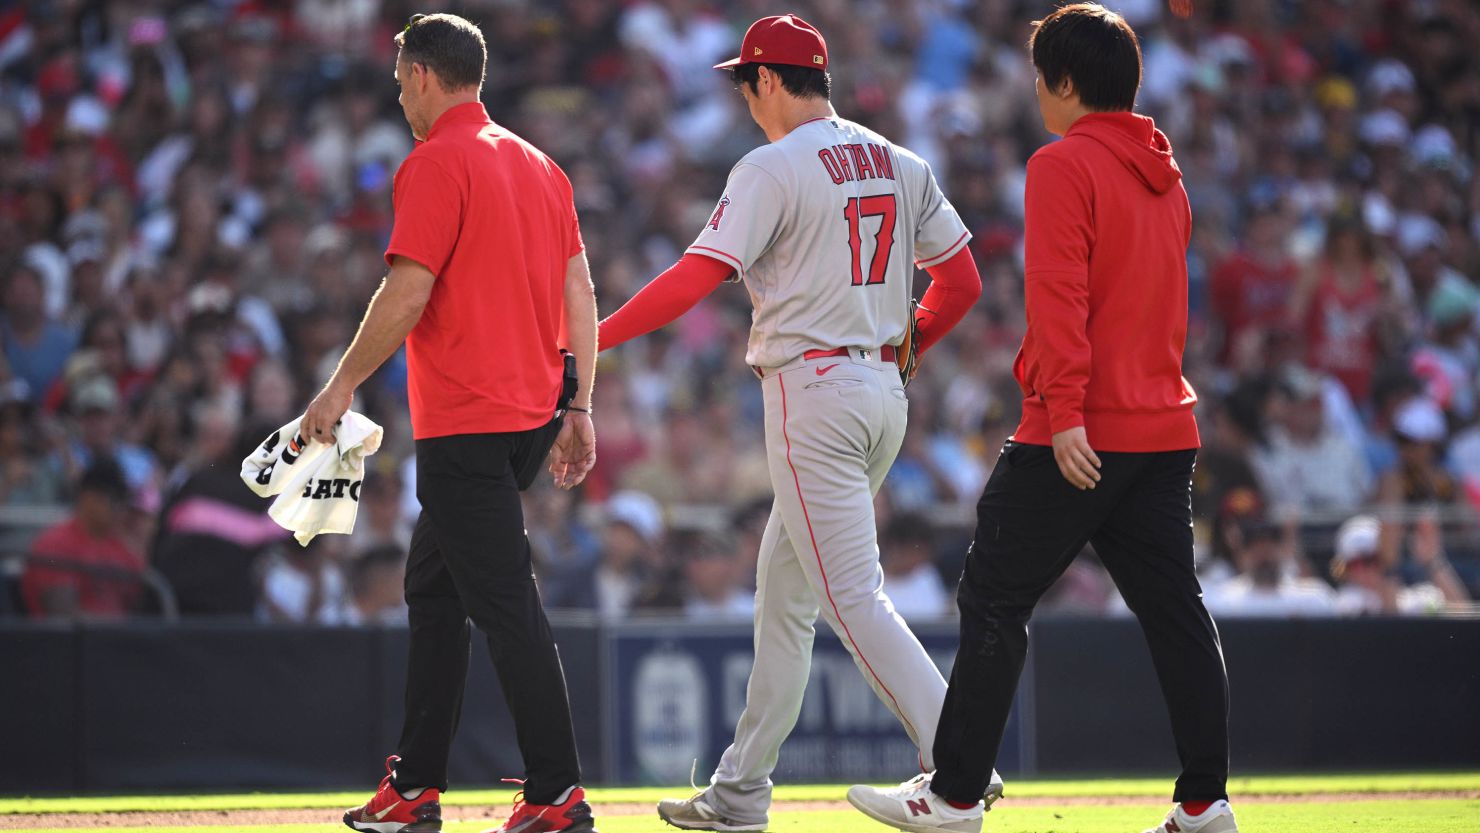 SAN DIEGO, CALIFORNIA - JULY 04: Shohei Ohtani #17 of the Los Angeles Angels walks to the dugout after being replaced during the sixth inning against the San Diego Padres at PETCO Park on July 04, 2023 in San Diego, California. (Photo by Orlando Ramirez/Getty Images)